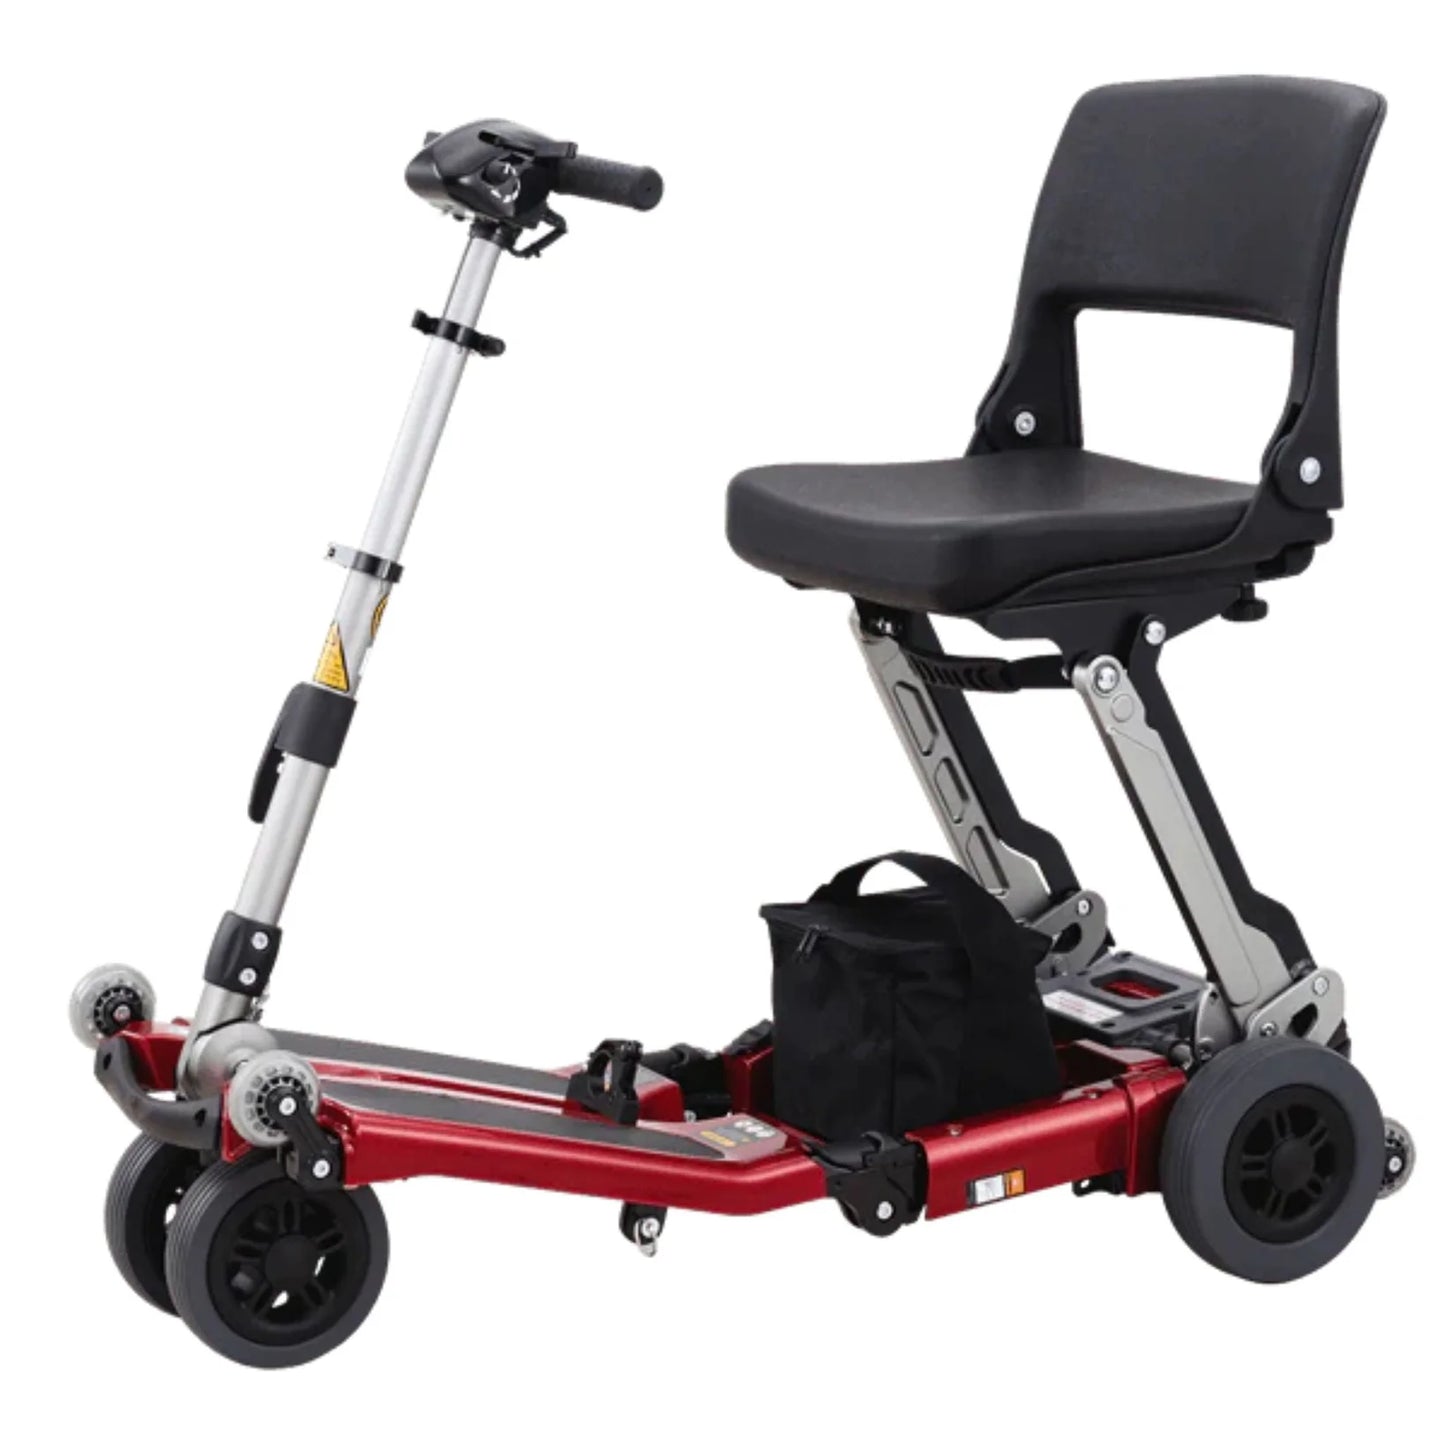 Luggie Classic II Folding Mobility Scooter